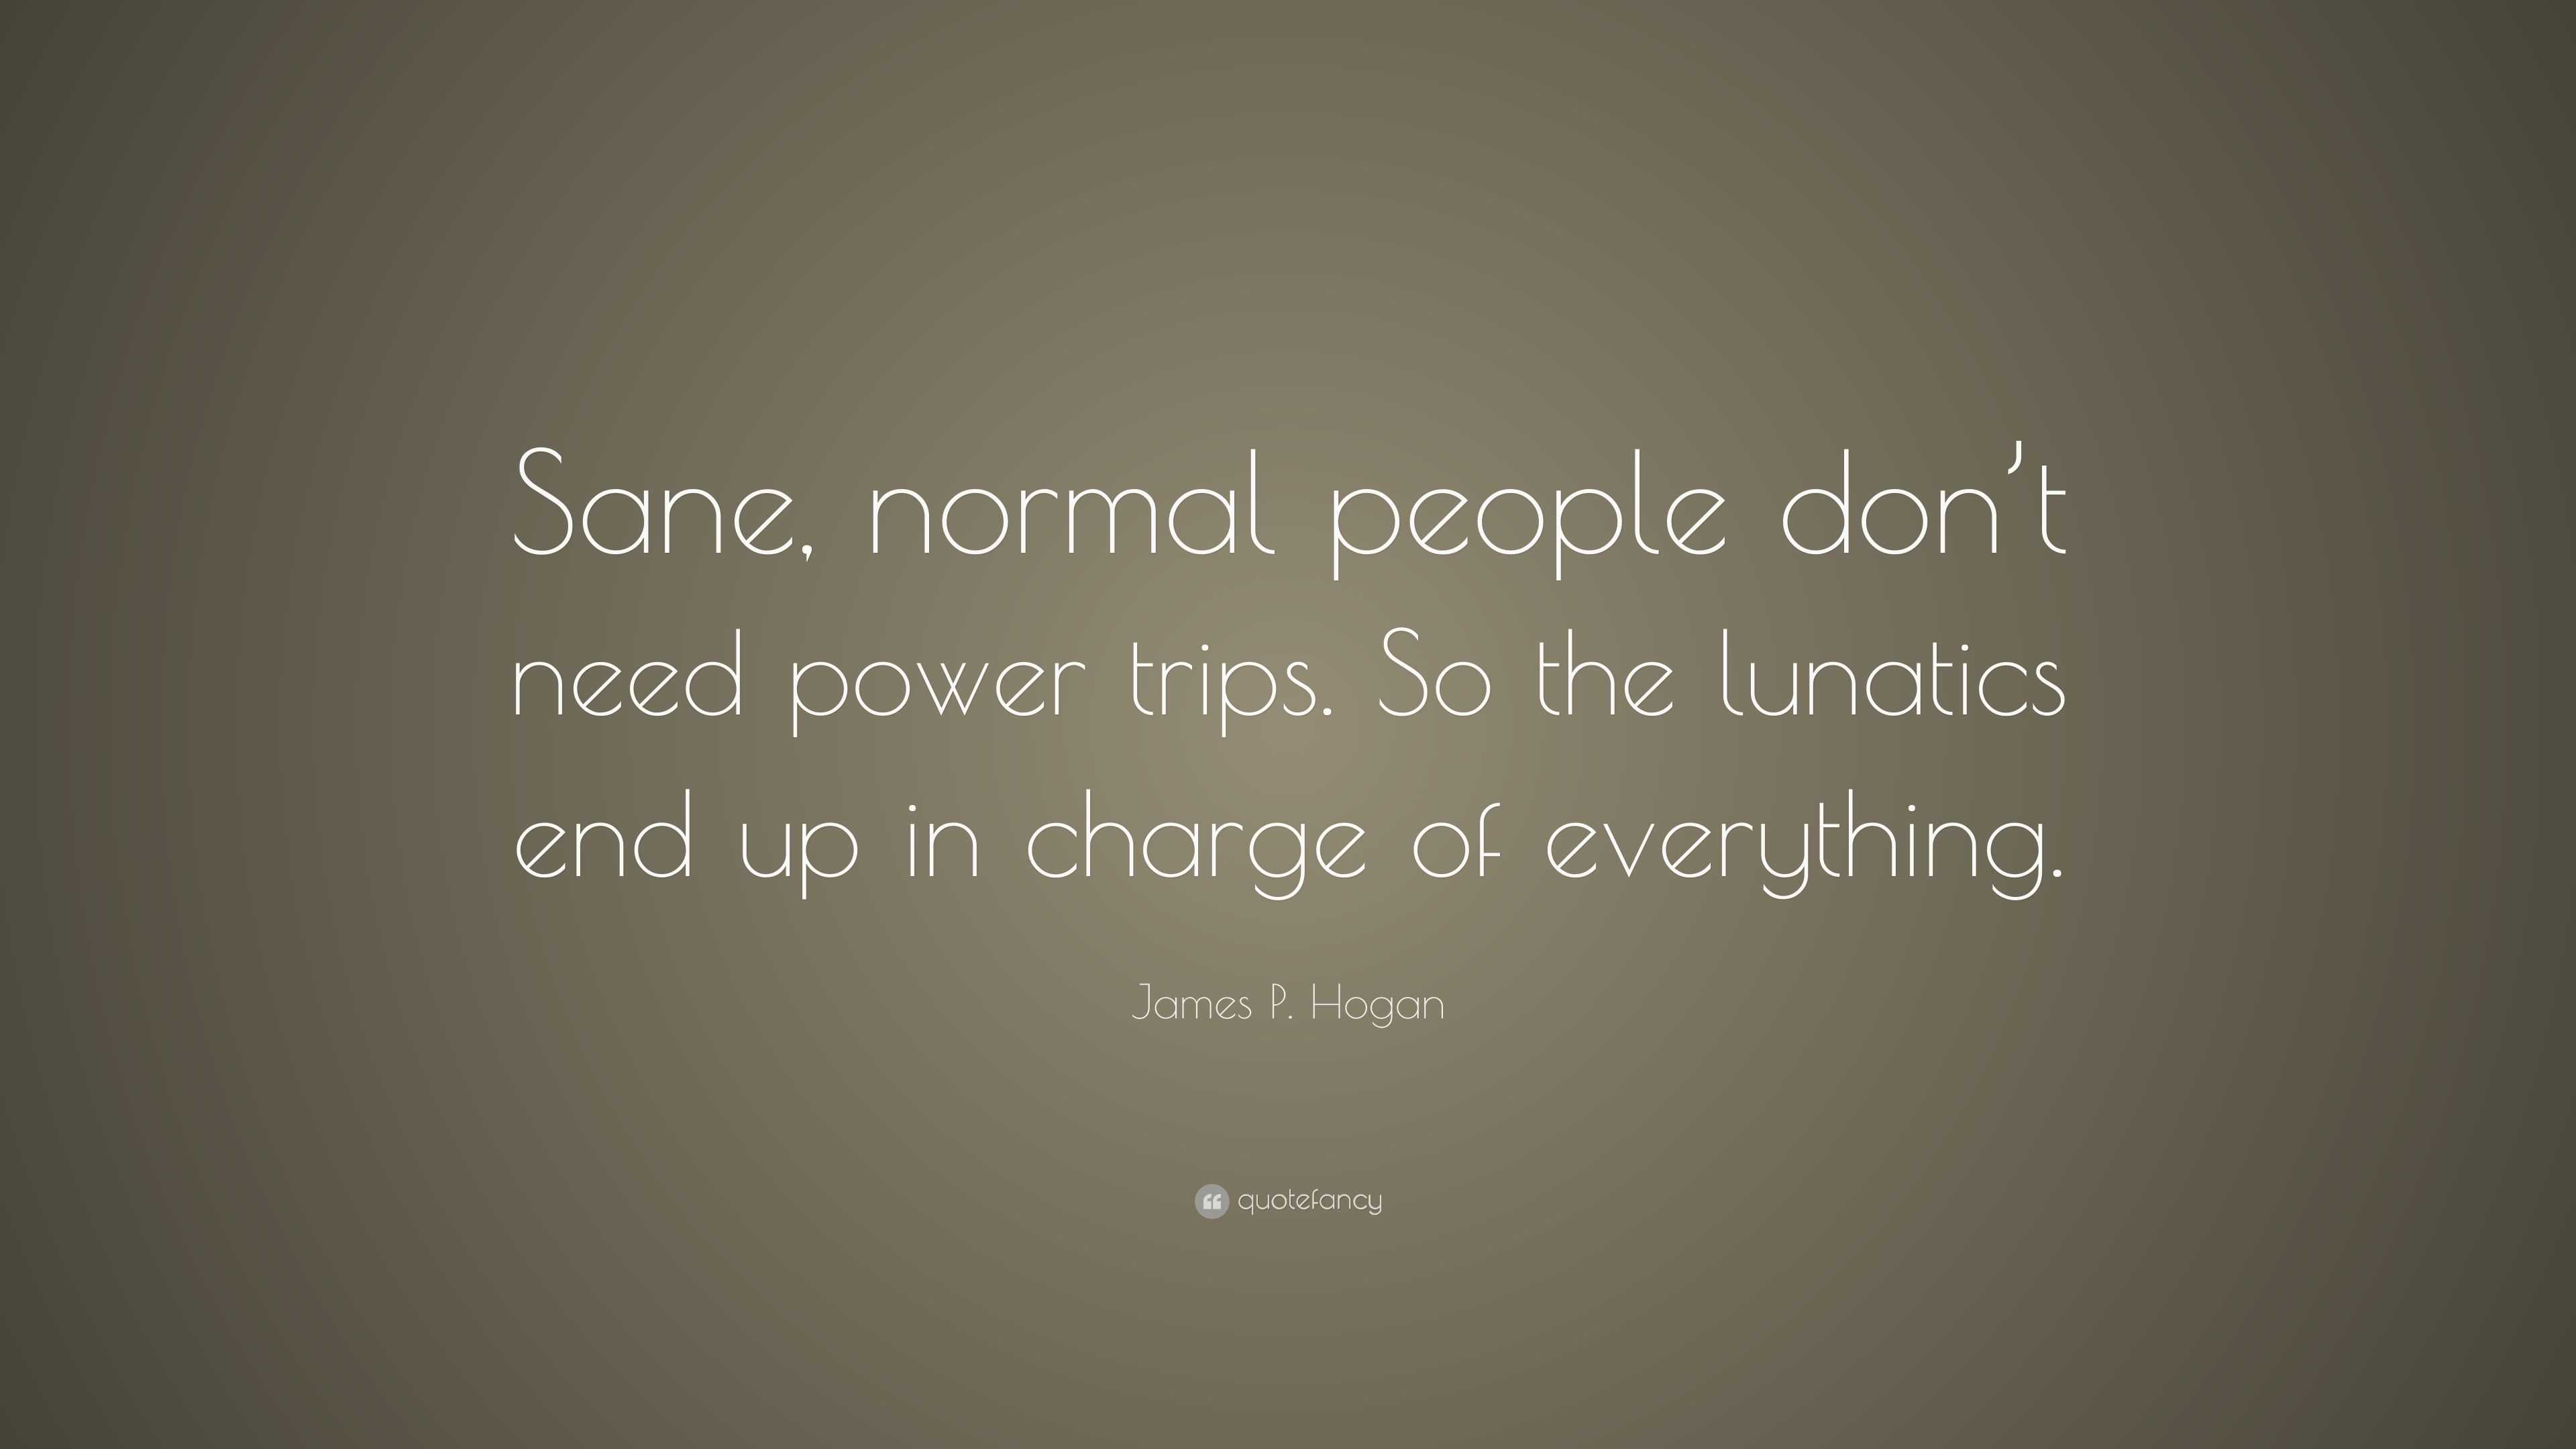 James P. Hogan Quote: “Sane, normal people don't need power trips